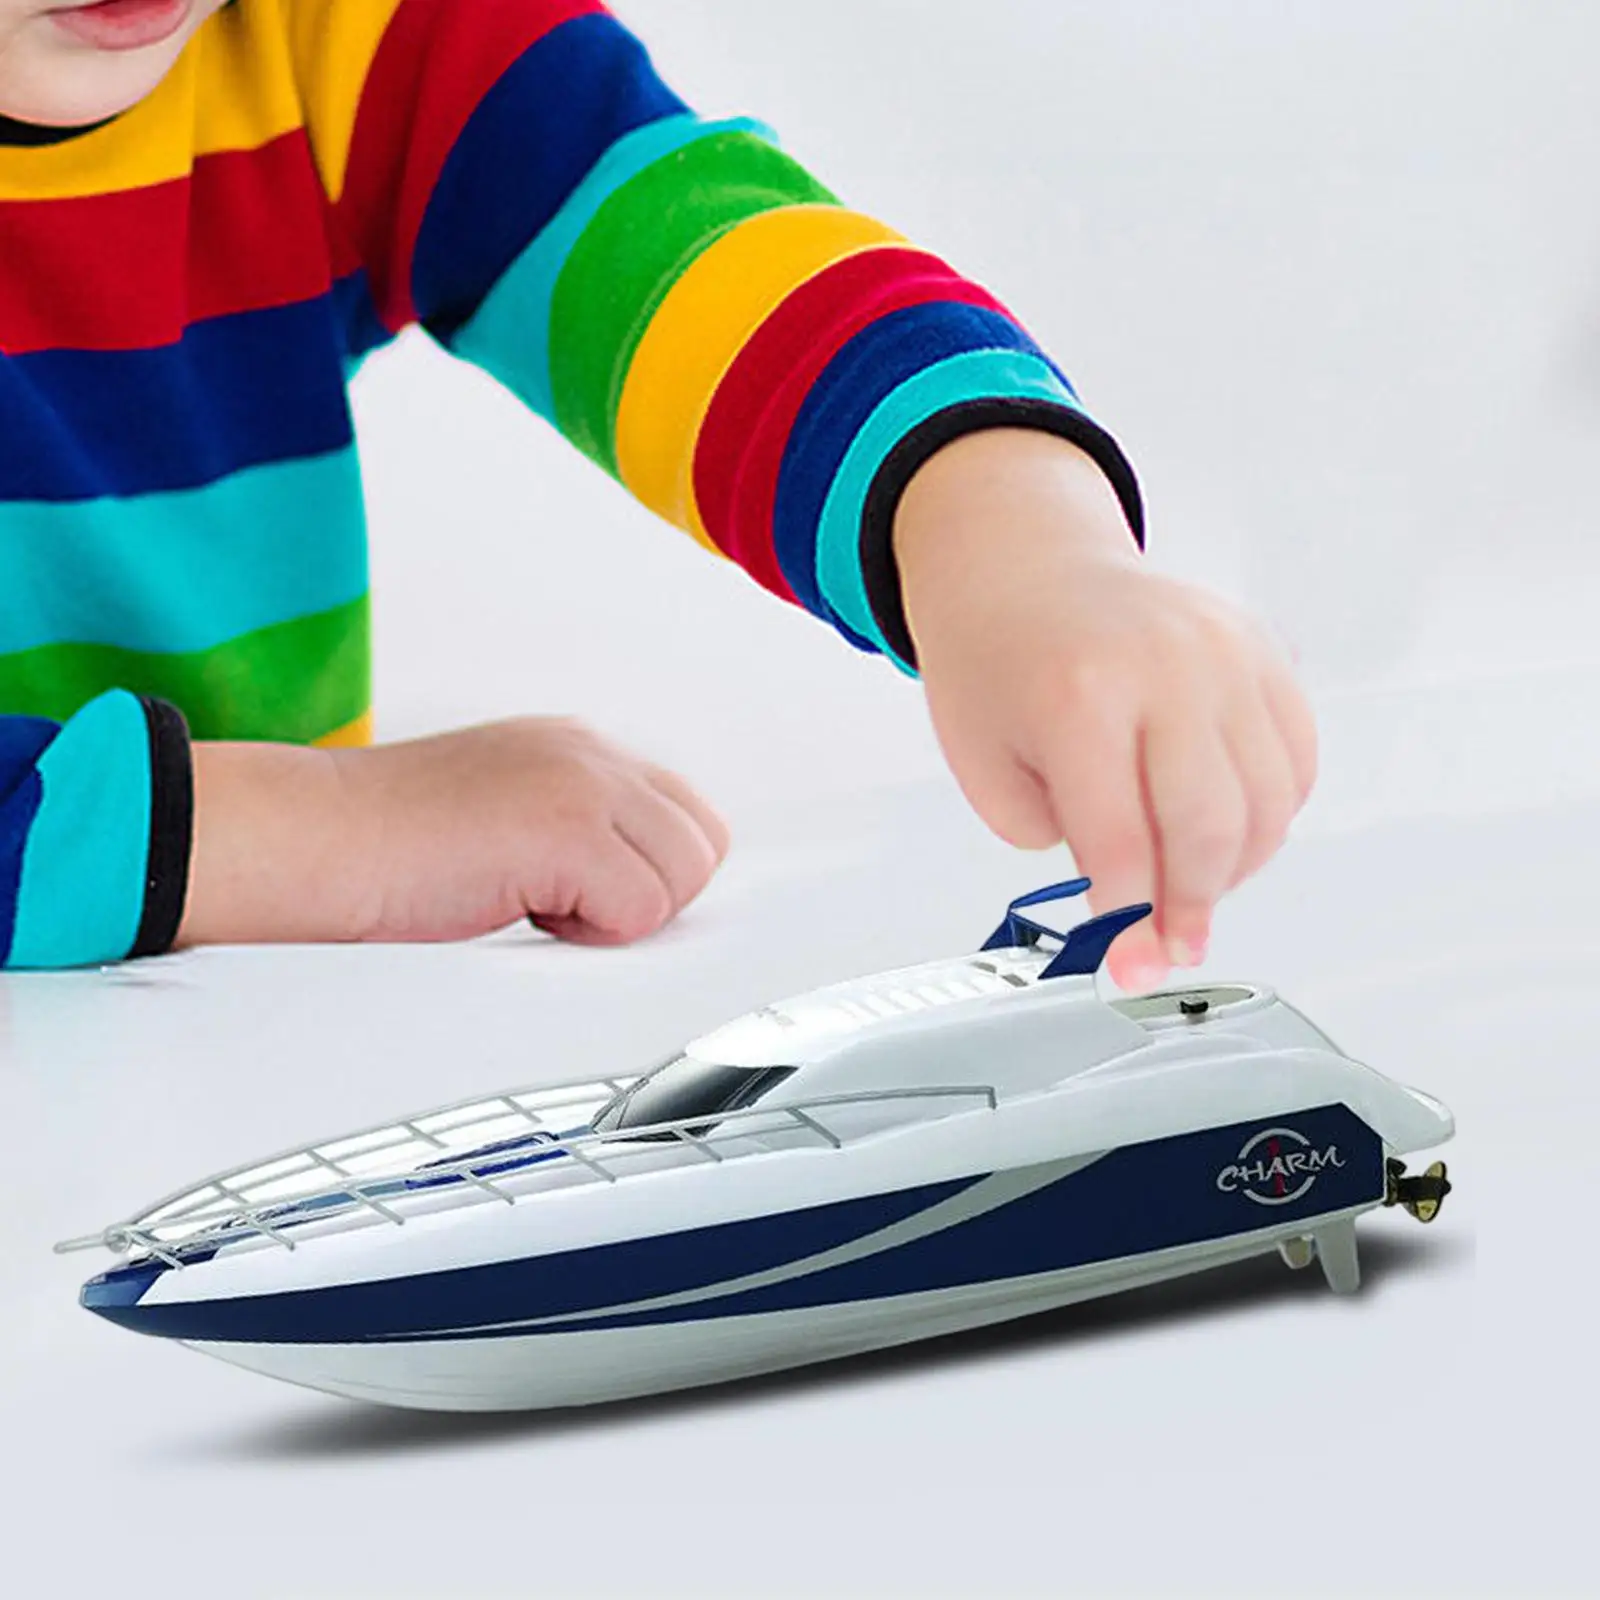 Portable Remote Control Boat RC Boat for Adults Children Birthday Gifts